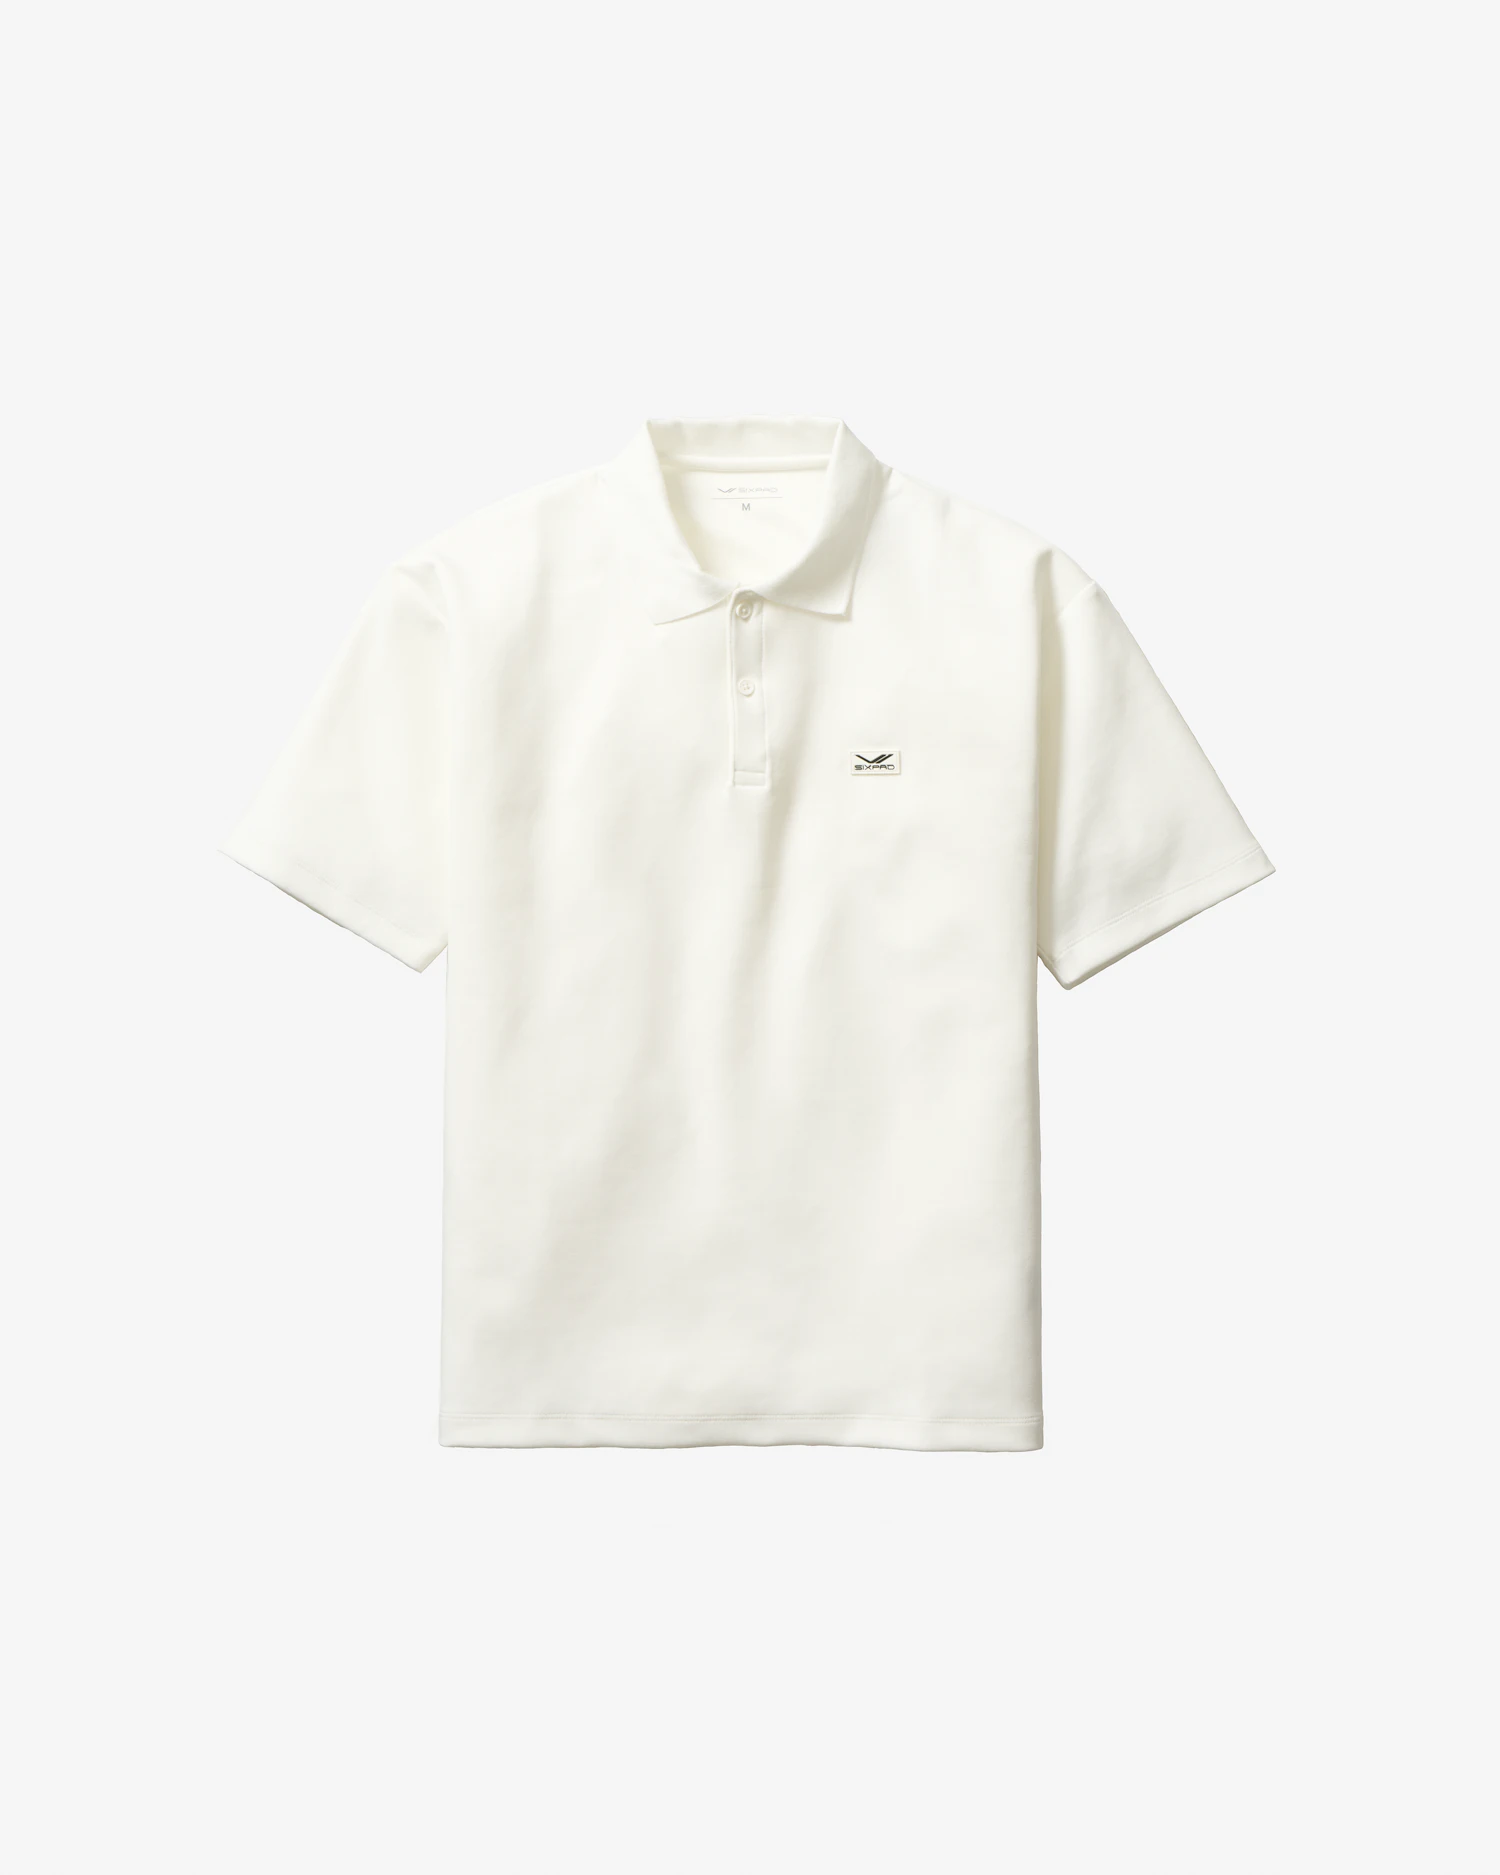 SIXPAD Recovery Wear polo shirt. Unisex. 9,900 yen (tax included)